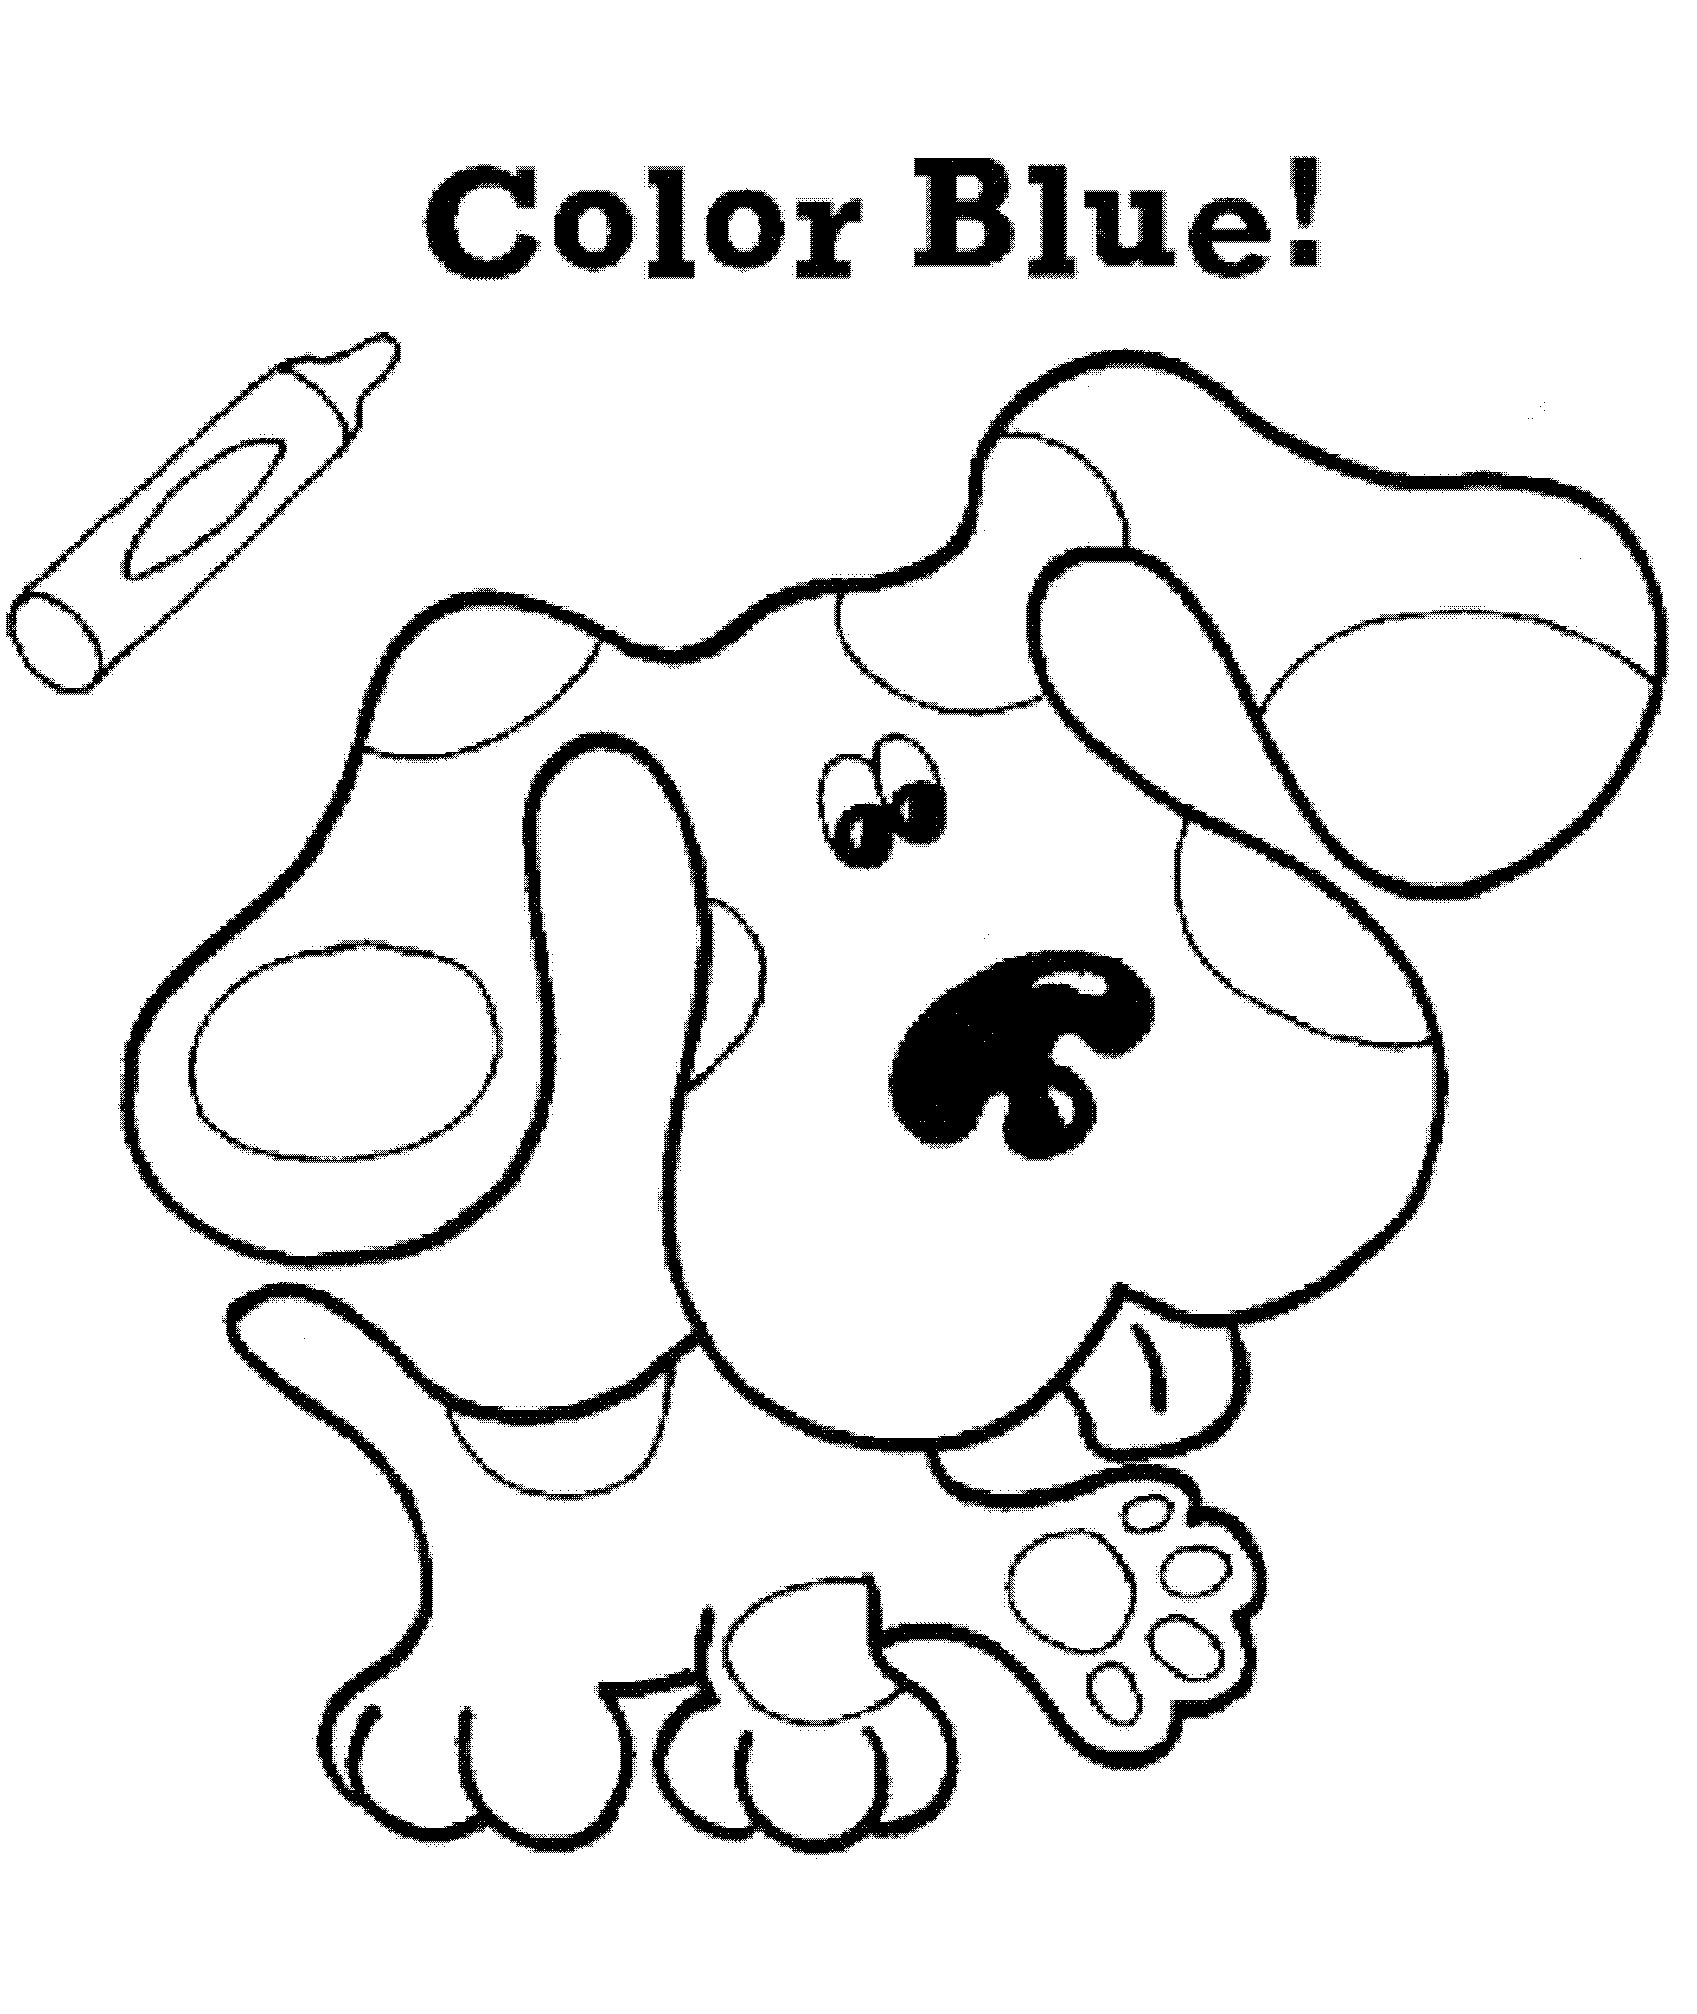 Blues Clues Coloring Pages
 Kids n fun